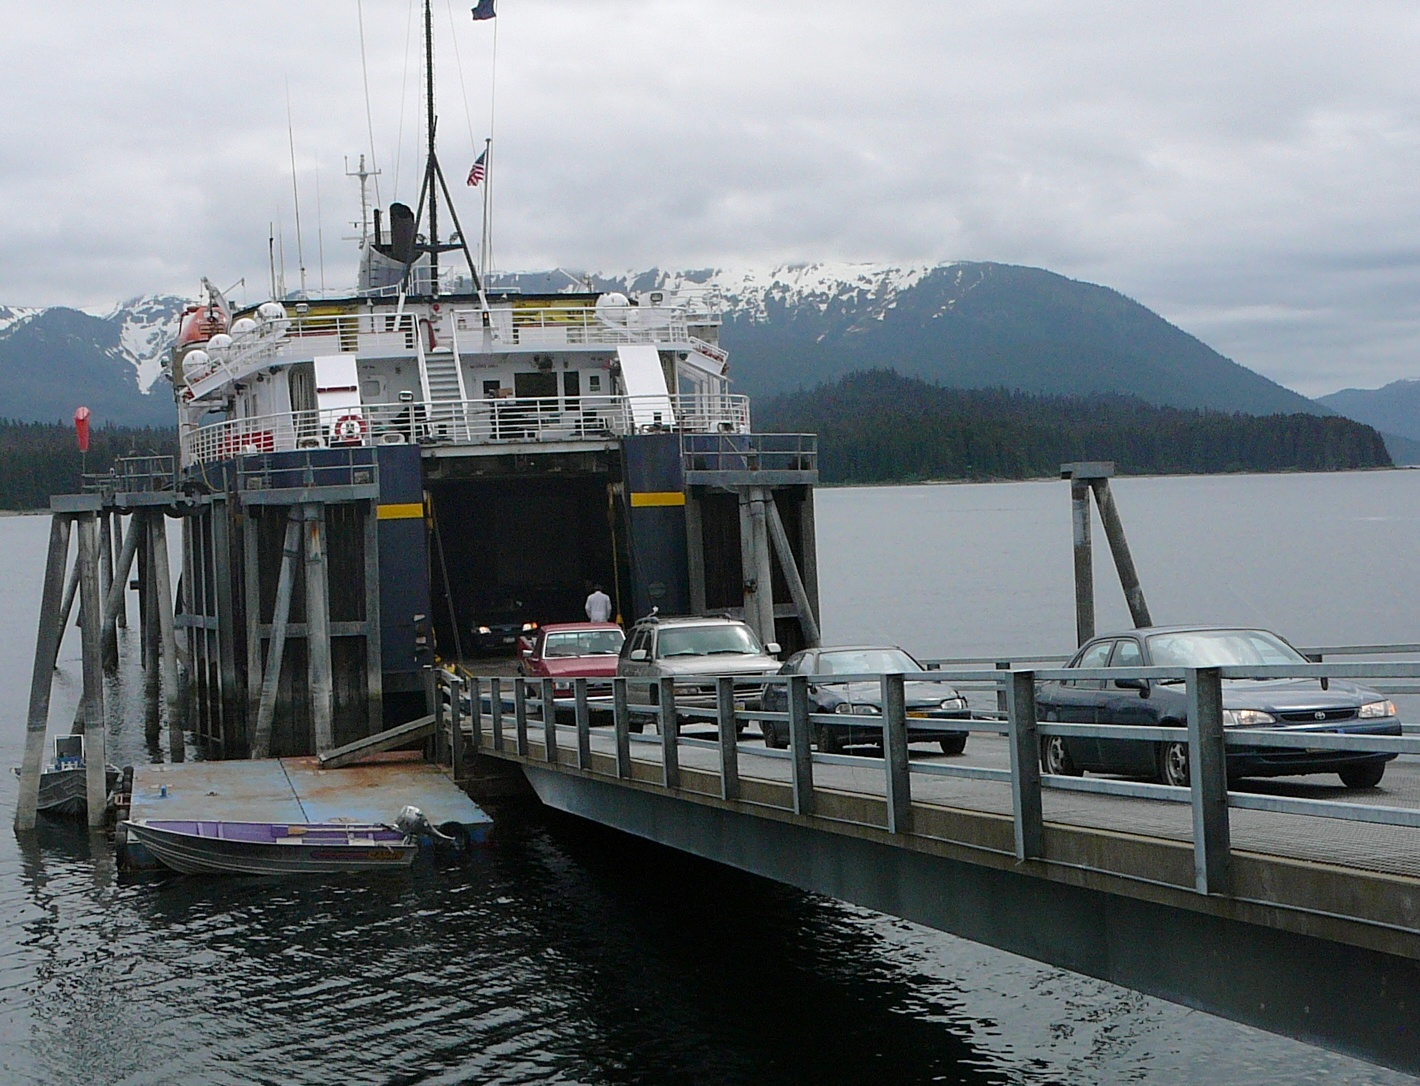 Drivers leave the ferry Fairweather at the Angoon terminal in 2010. Angoon will have more service this winter. (Photo by Ed Schoenfeld, CoastAlaska News - Juneau)